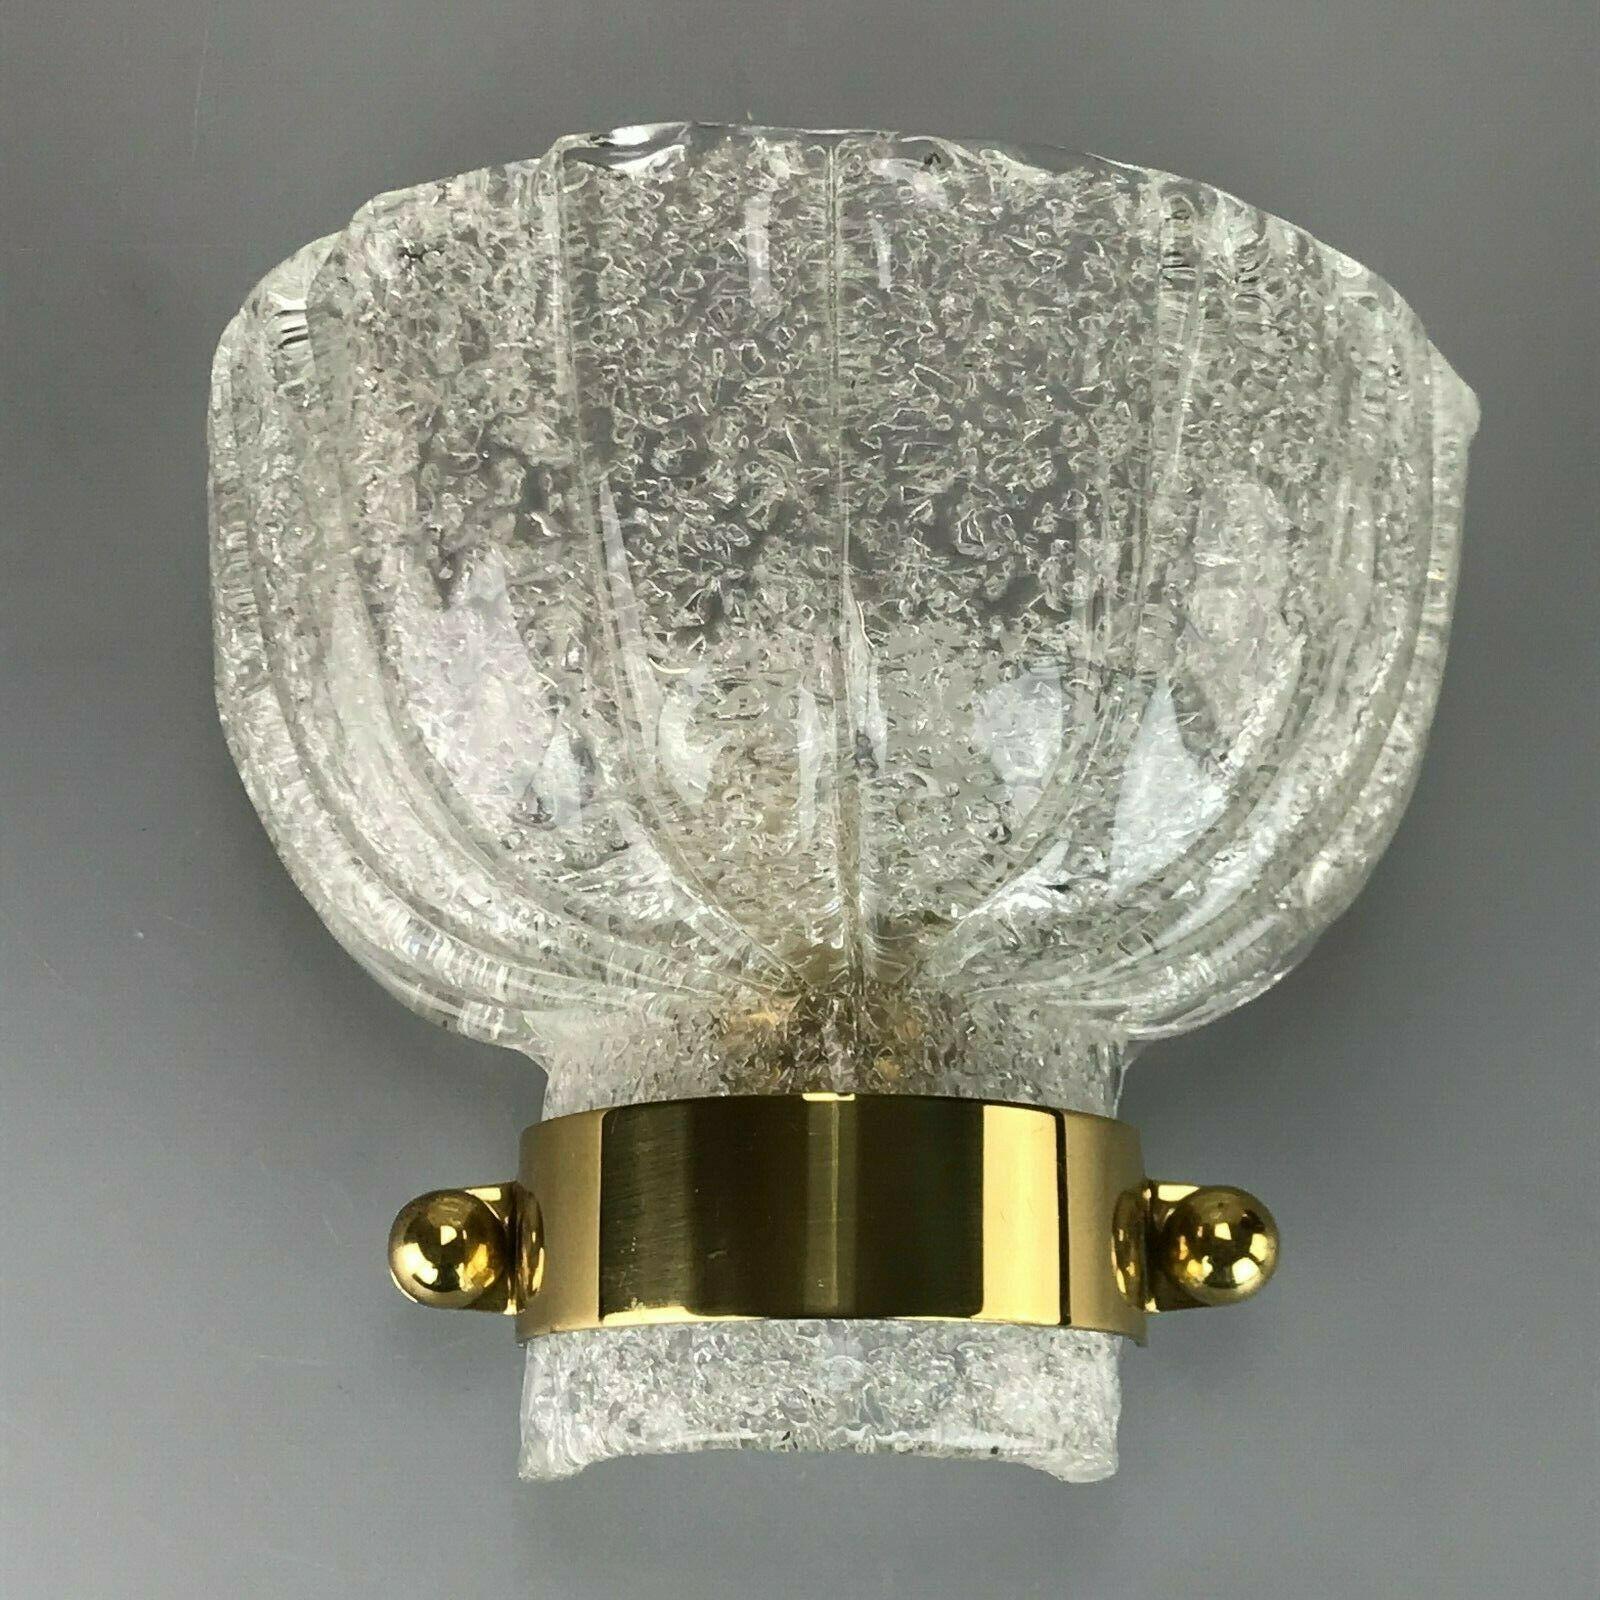 German 60s 70s Lamp Fixture Wall Sconce Wall Lamp Hillebrand Space Age Design